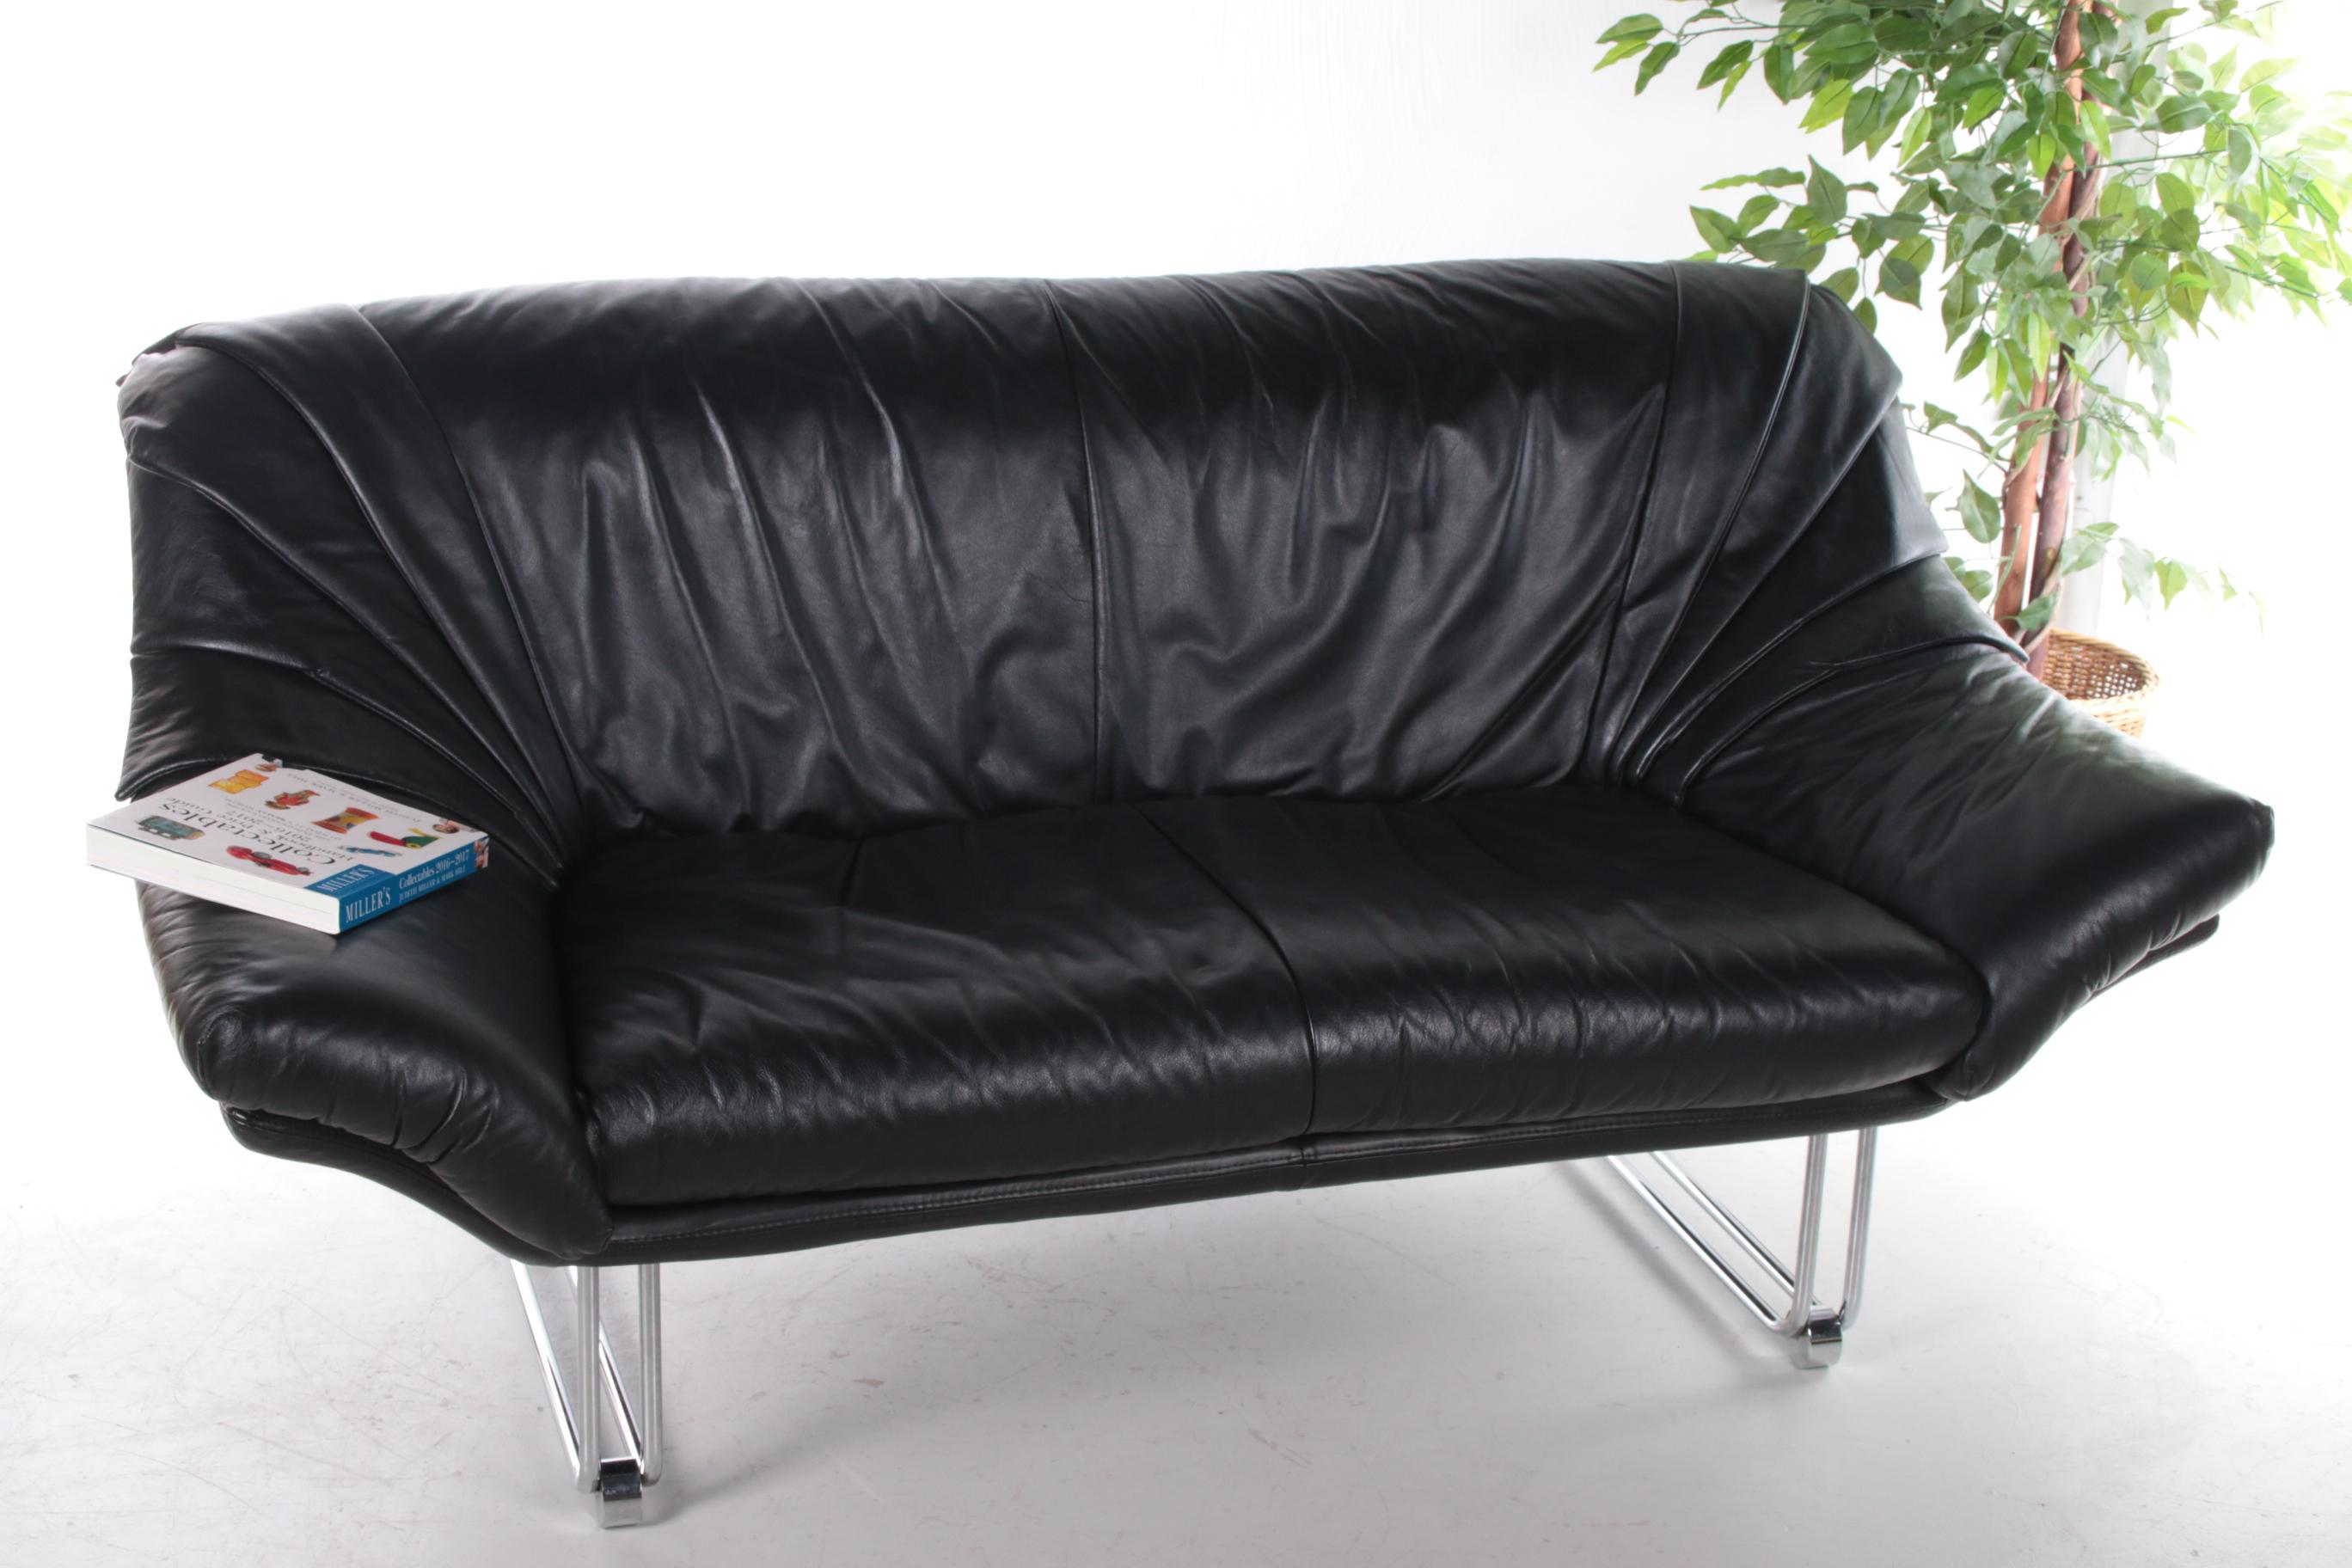 Italian black leather Postmodern 2 seater sofa, 1970s

Strictly speaking, postmodern design was a short-lived movement that manifested itself mainly in Italy and the United States in the early 1980s. The features of postmodern furniture and other